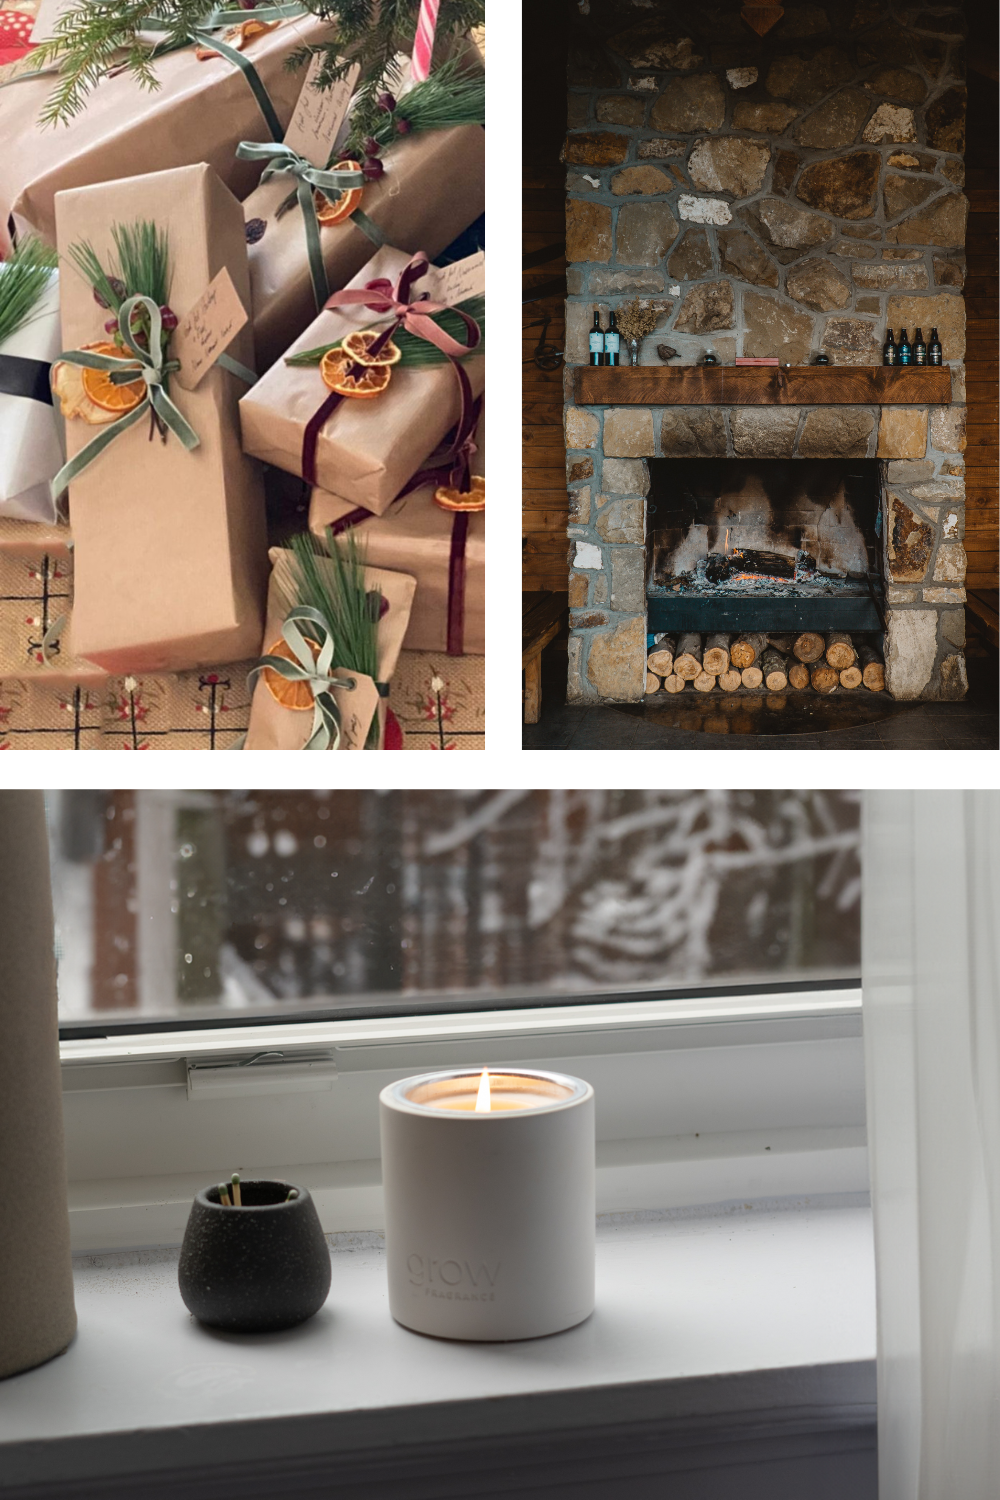 Non-Toxic Winter Candle: Cozy up with Holiday Hearth. Fragrance notes of cinnamon, vanilla, and smoky woods. Ideal for a warm, festive ambiance during chilly evenings.